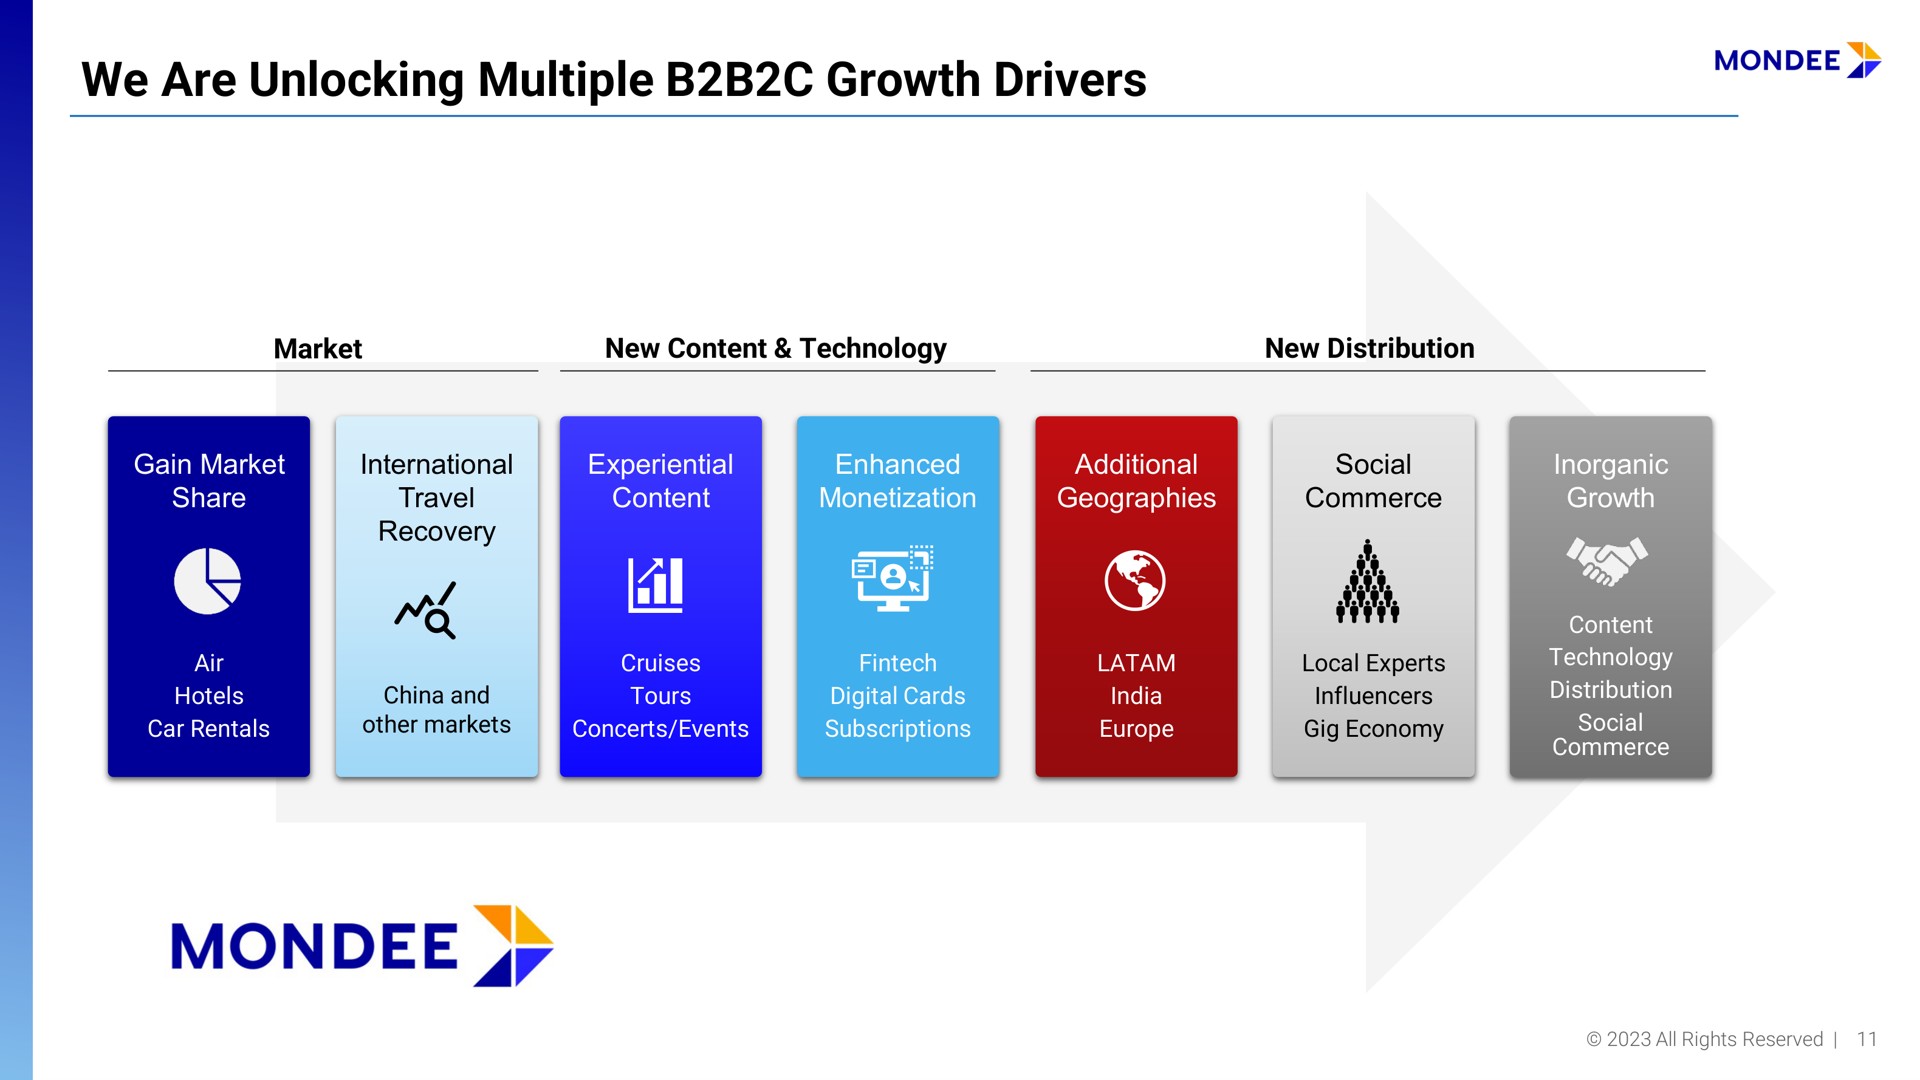 we are unlocking multiple growth drivers | Mondee